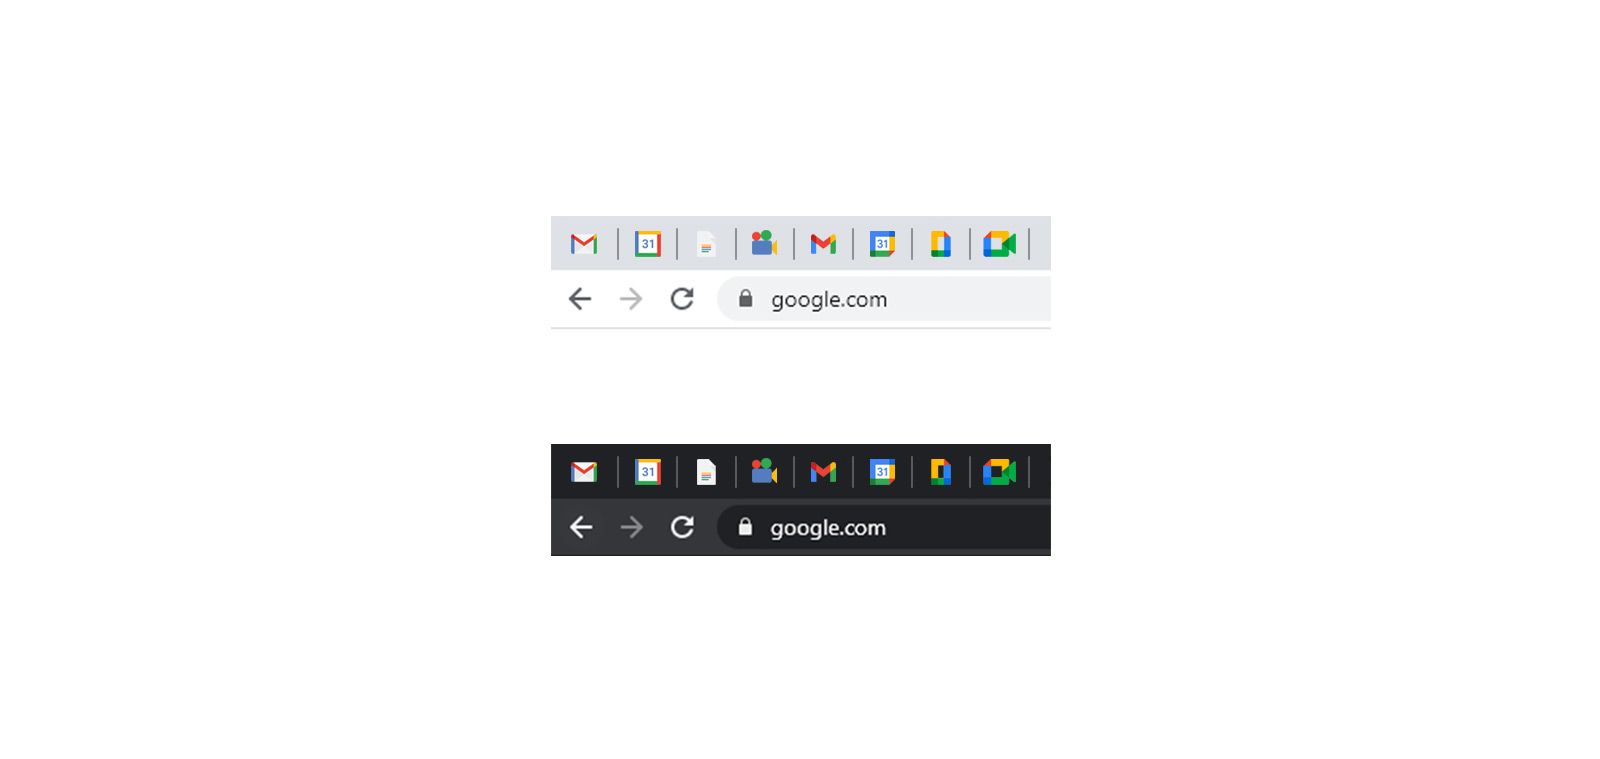 Screenshot of redesigned icons in an array of browser tabs